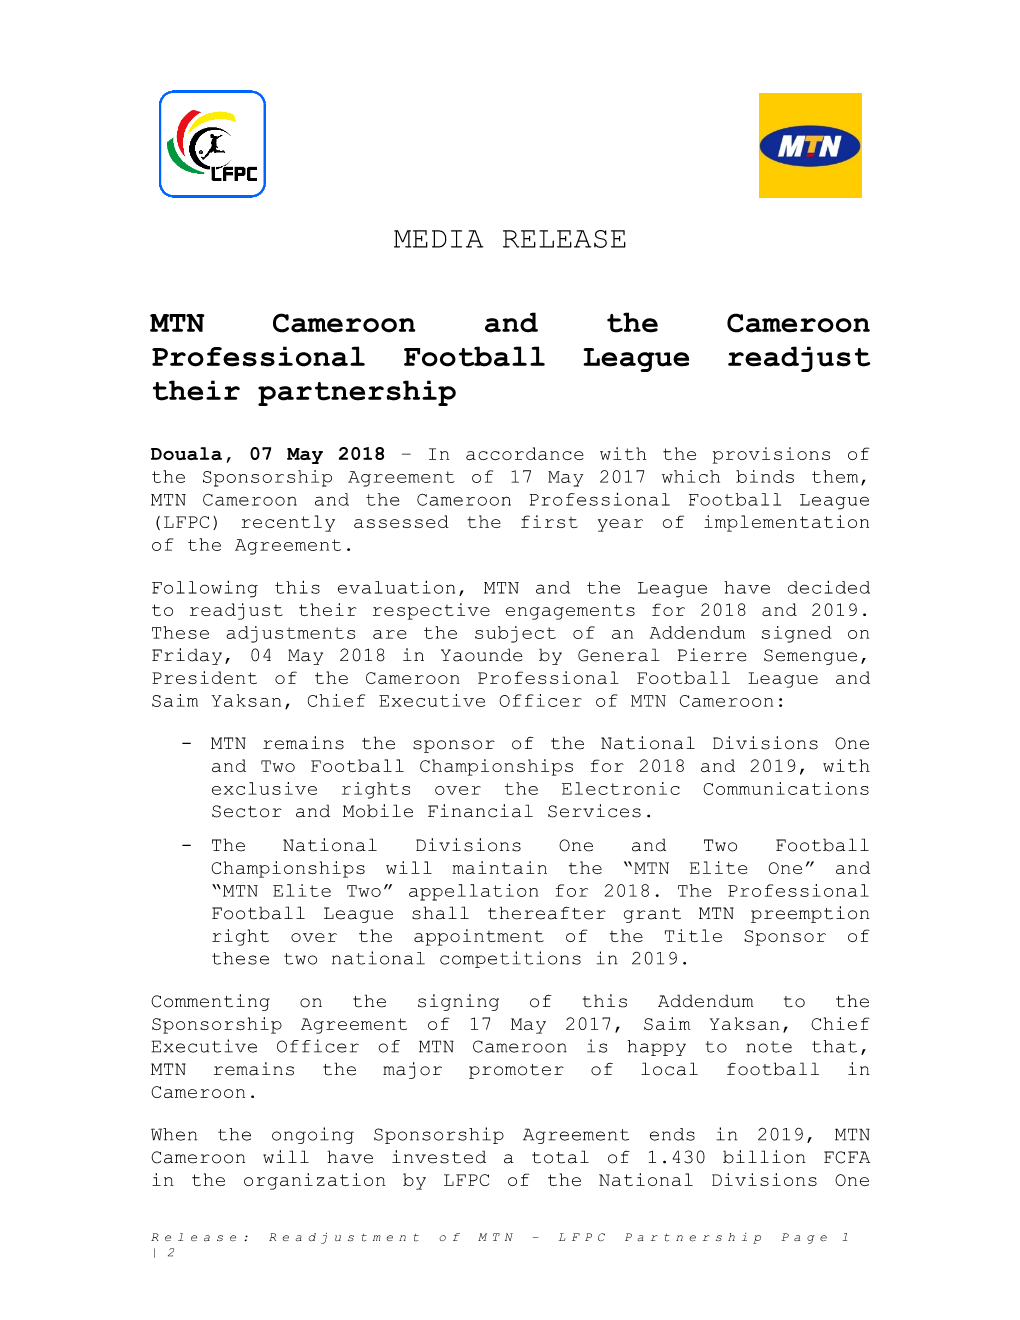 MEDIA RELEASE MTN Cameroon and the Cameroon Professional Football League Readjust Their Partnership